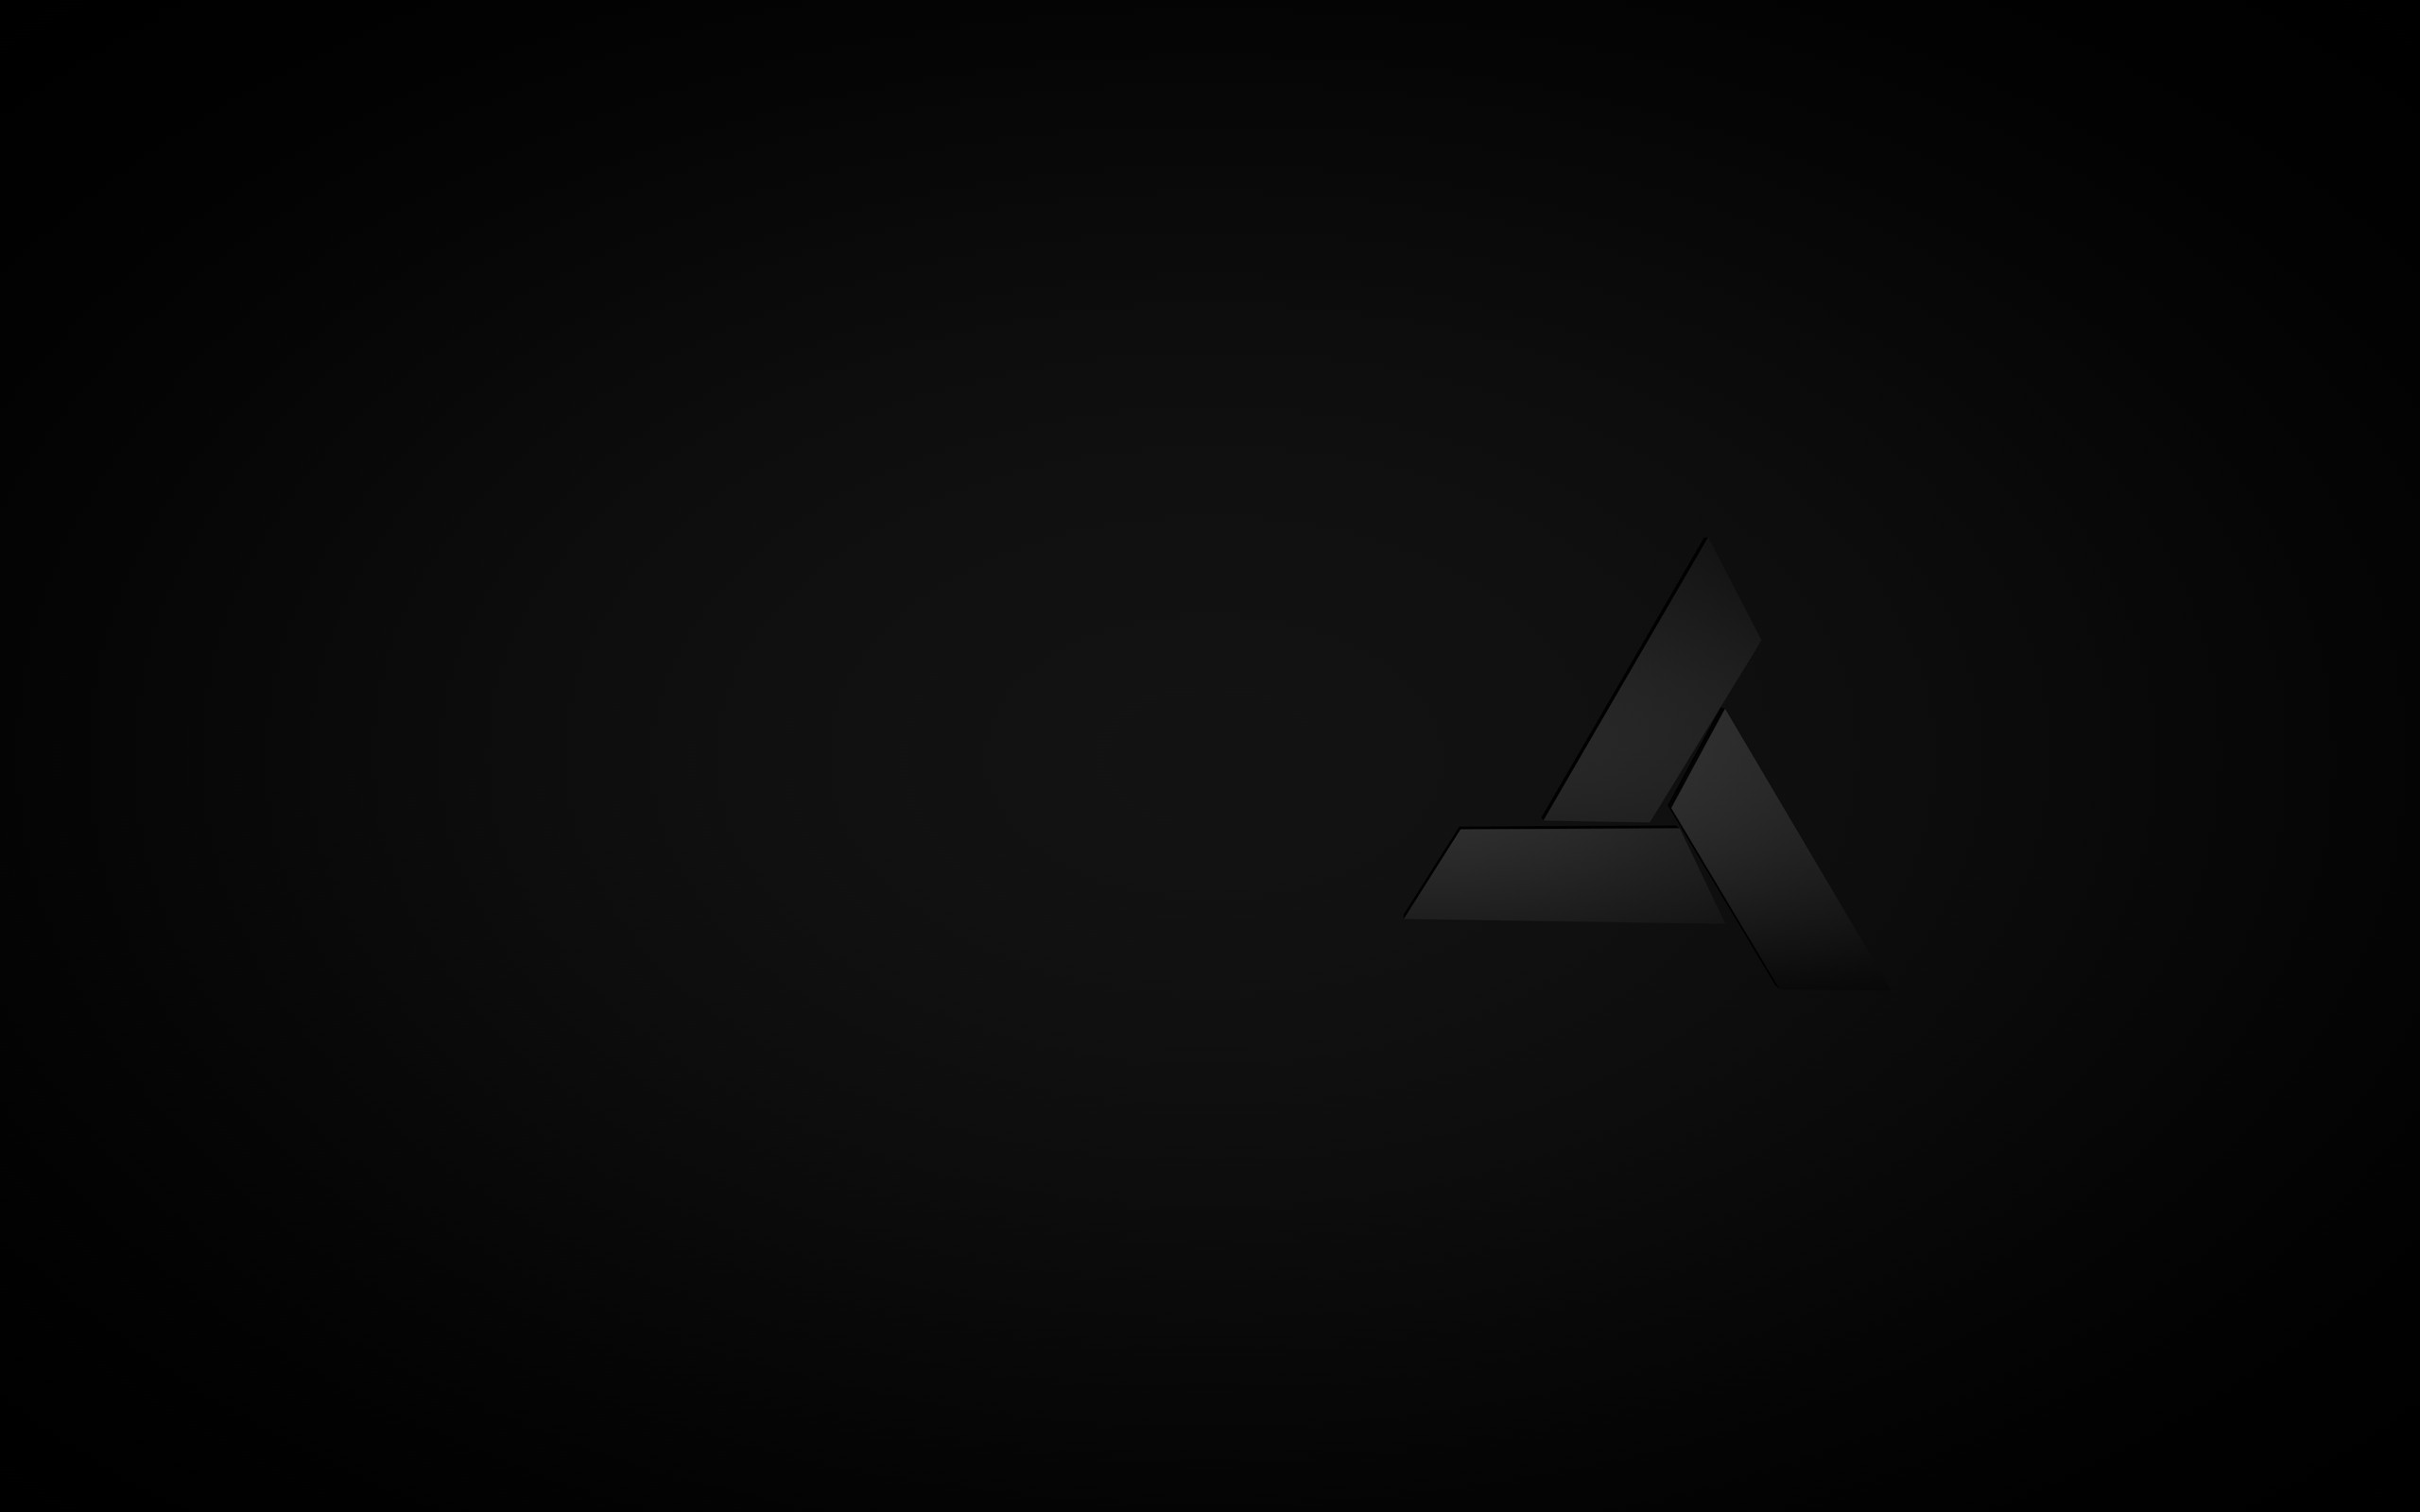 General 2560x1600 black Assassin's Creed simple background video games minimalism black background PC gaming